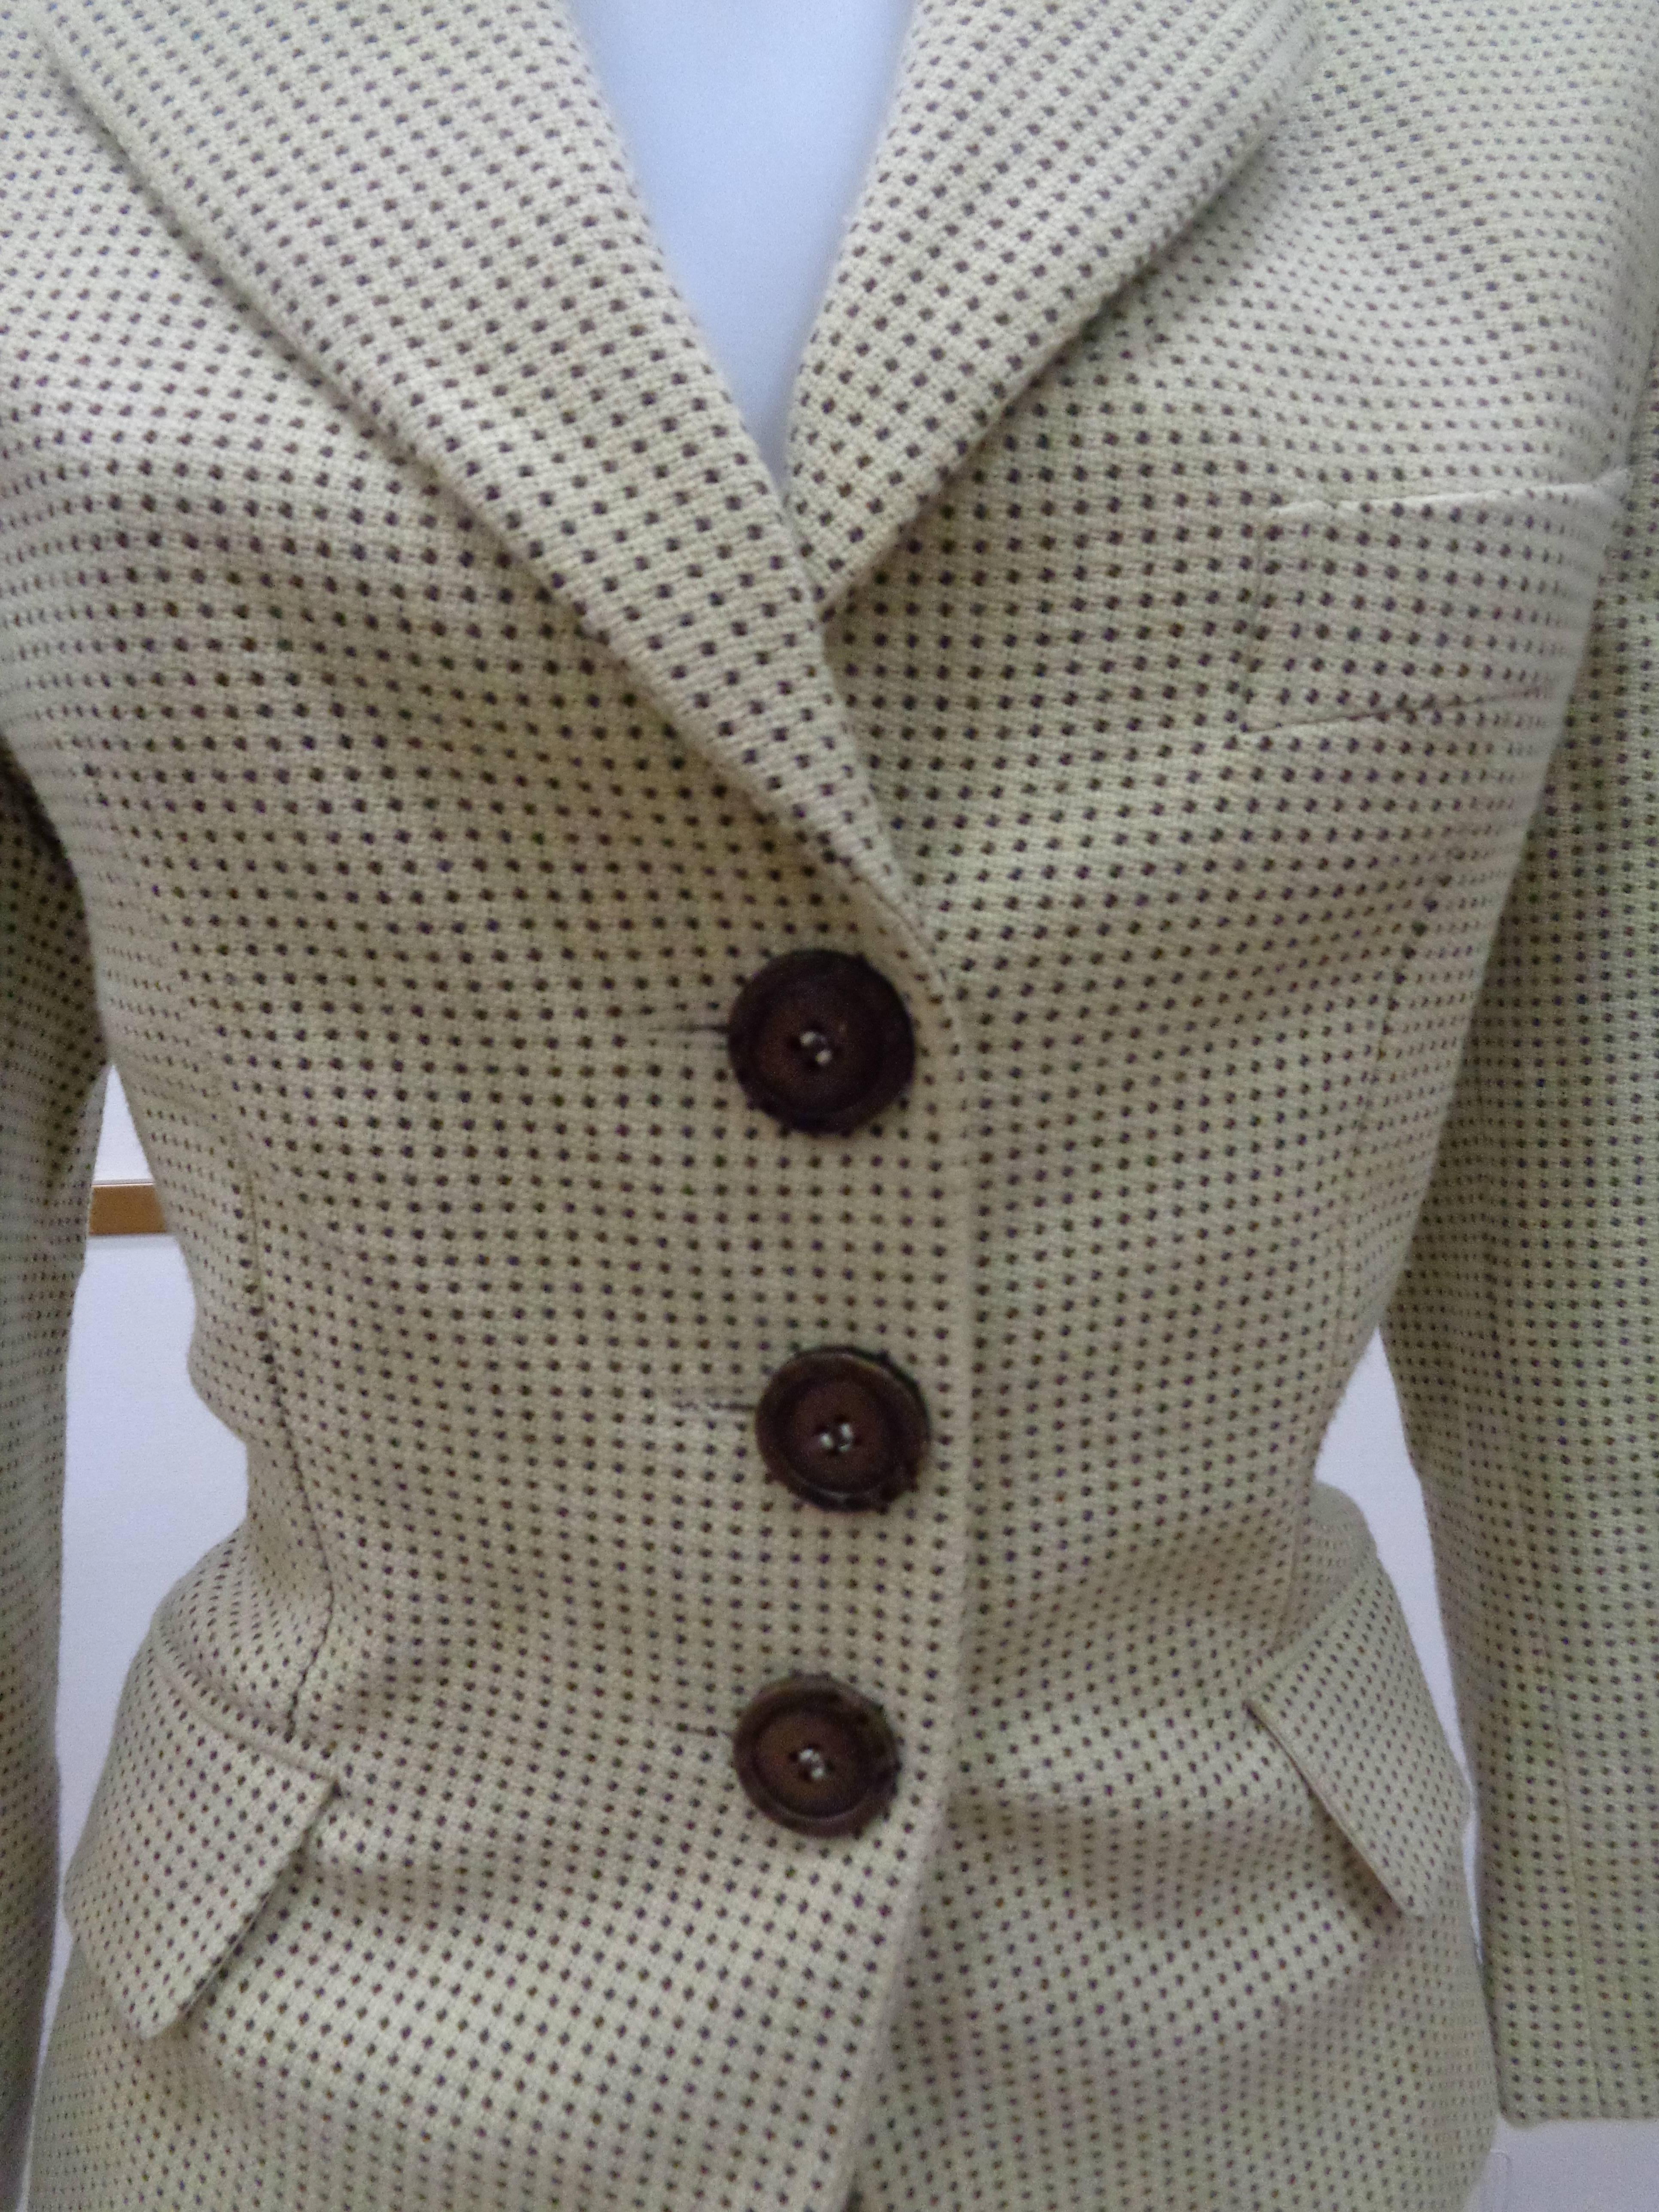 Moschino Couture Beije Wool Skirt Suit

Moschuino couture beije wool and cachmere skirt suit totally made in italy in italian size range 46

Measurements:

Skirt lenght 52 cm

Jacket lenght 61 cm

Jacket shoulder to hem 50 cm